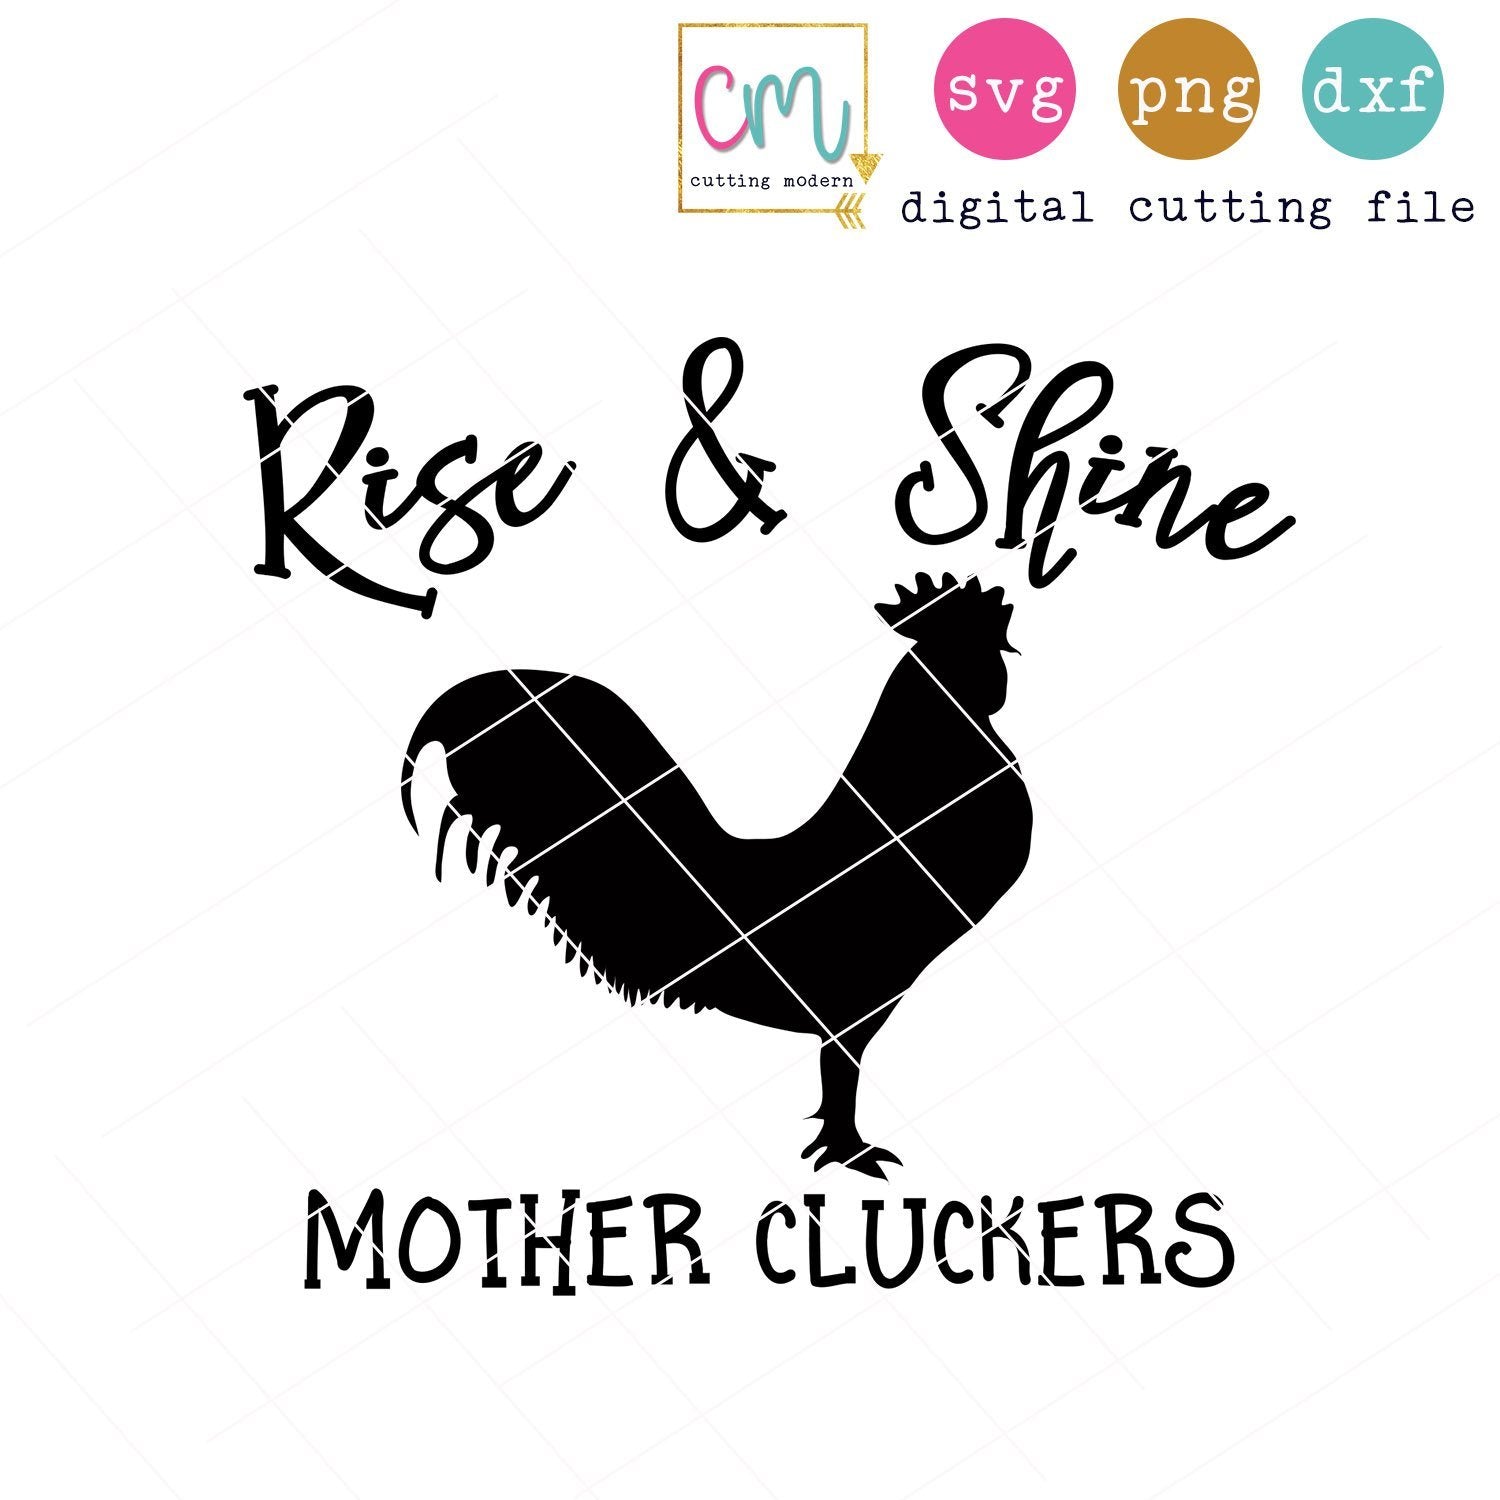 Download Silhouette Studio Cricut Design Space Rise And Shine Mother Cluckers Svg Dxf Cutting File Rise And Shine Svg Dxf Cut File Materials Craft Supplies Tools Dekorasyonu Net